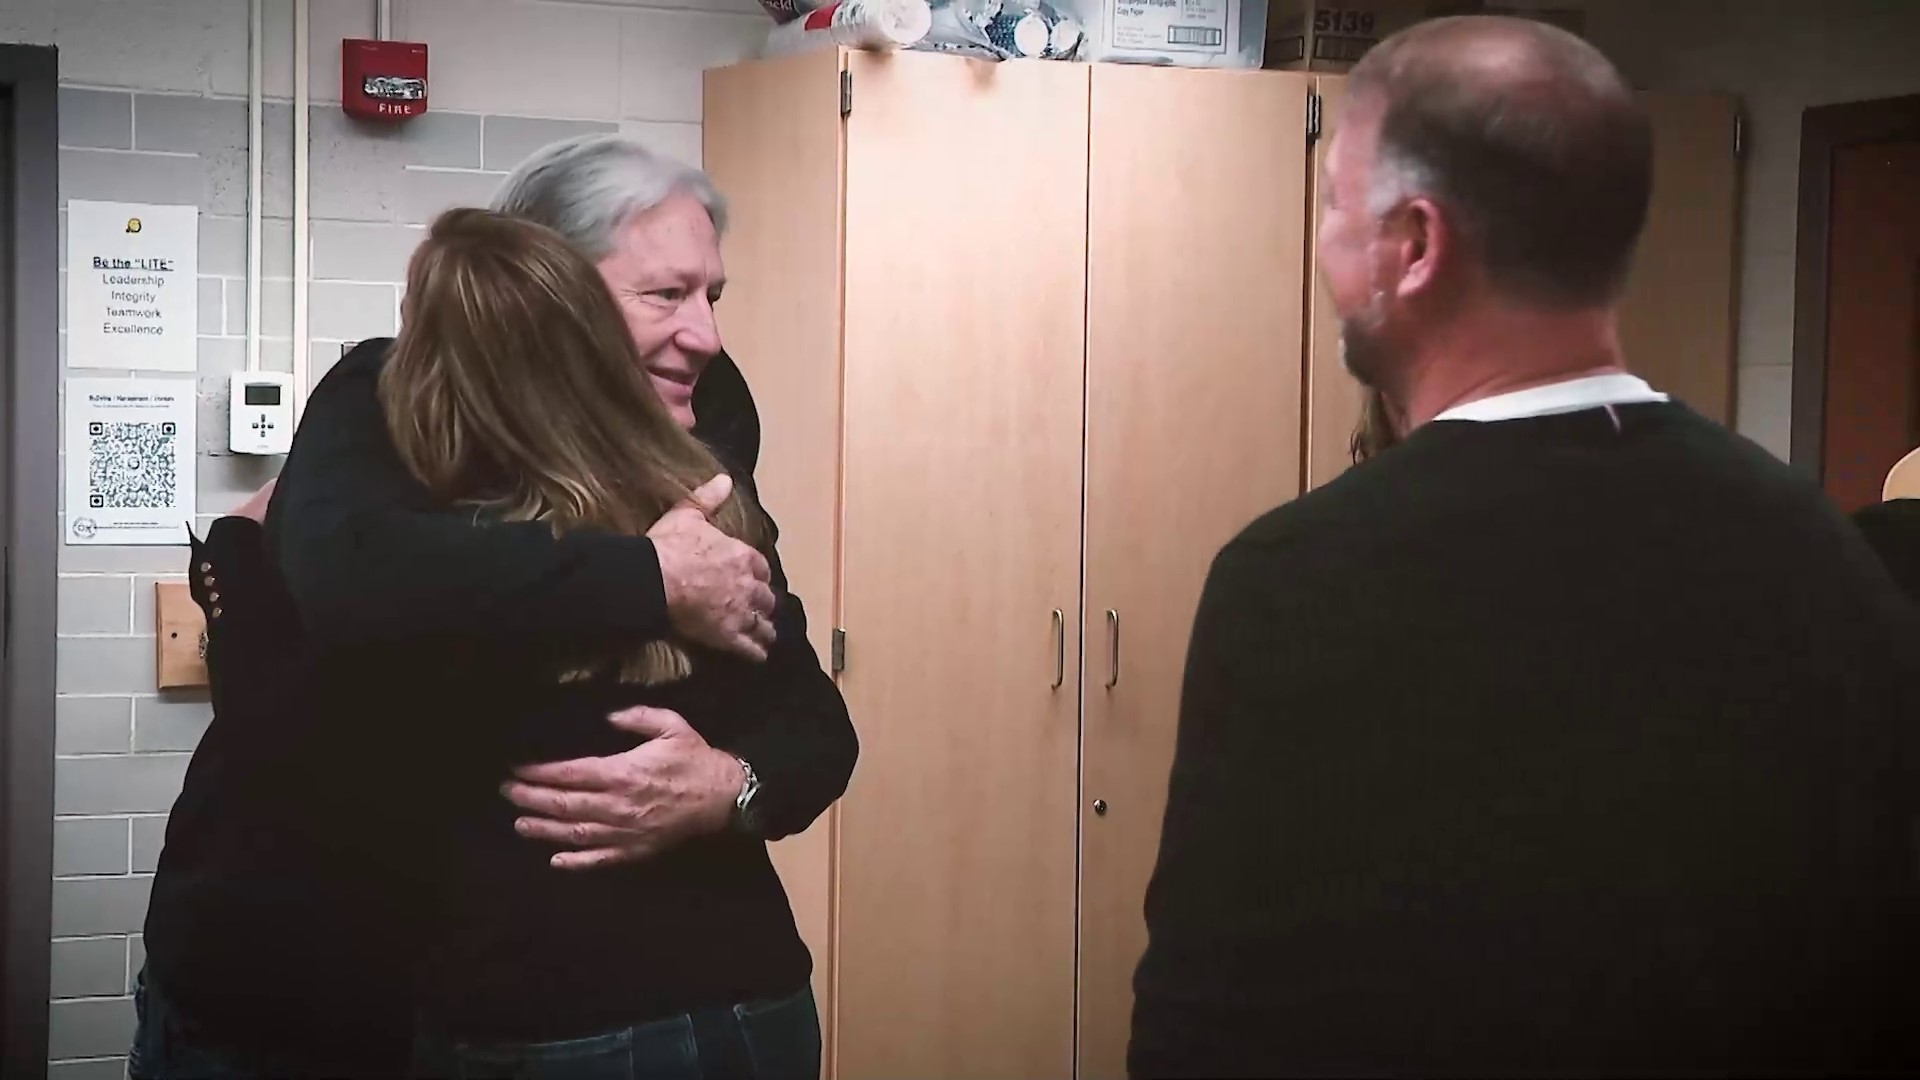 On Monday at 6 p.m., watch 10TV as the Stone Foltz family meets the man who received their son's liver.